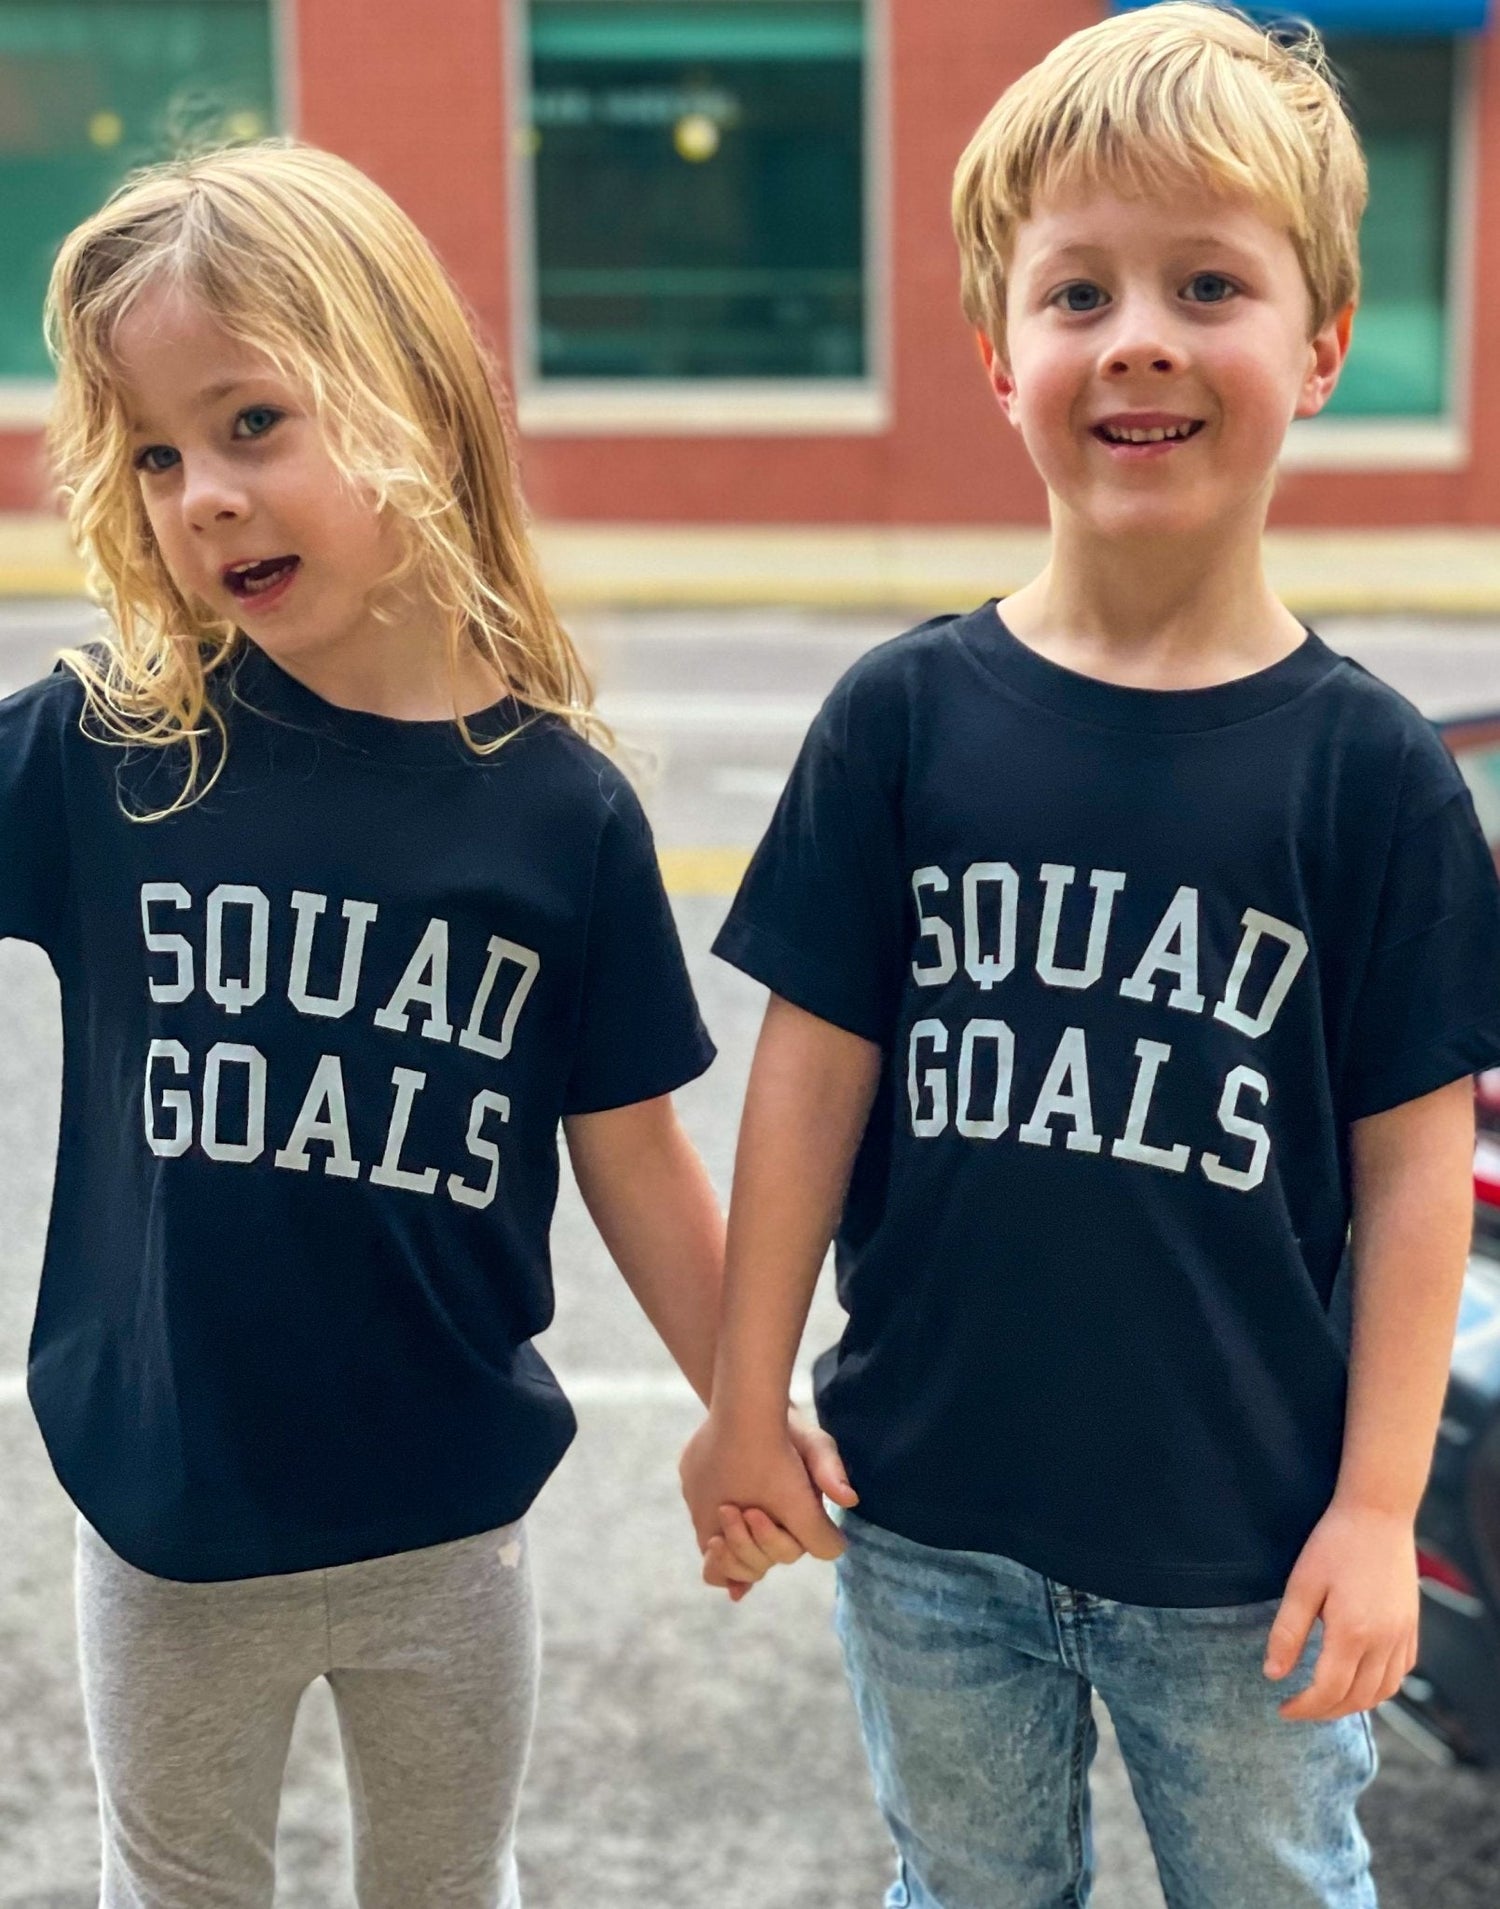 Squad Goals Tee- Toddler - Charlie Rae - 2T - Unisex Tops- 250 - Charlie Rae